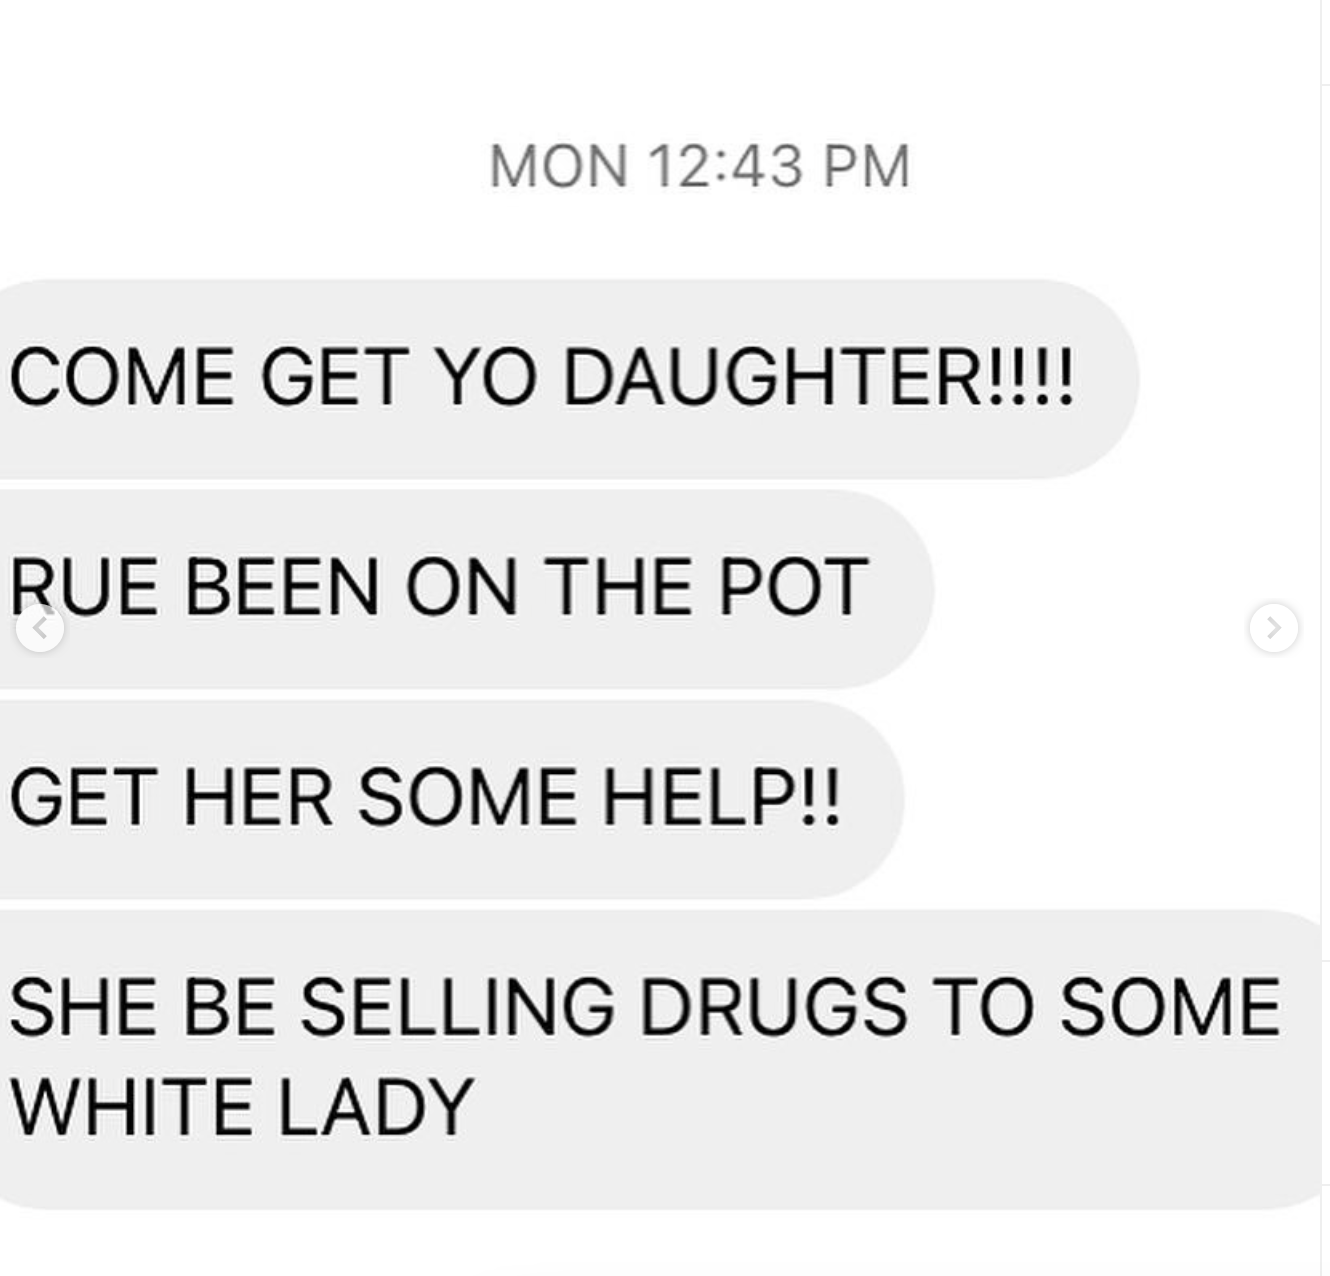 Come get yo daughter!!!! Rue been on the pot. Get her some help!! She be selling drugs to some white lady